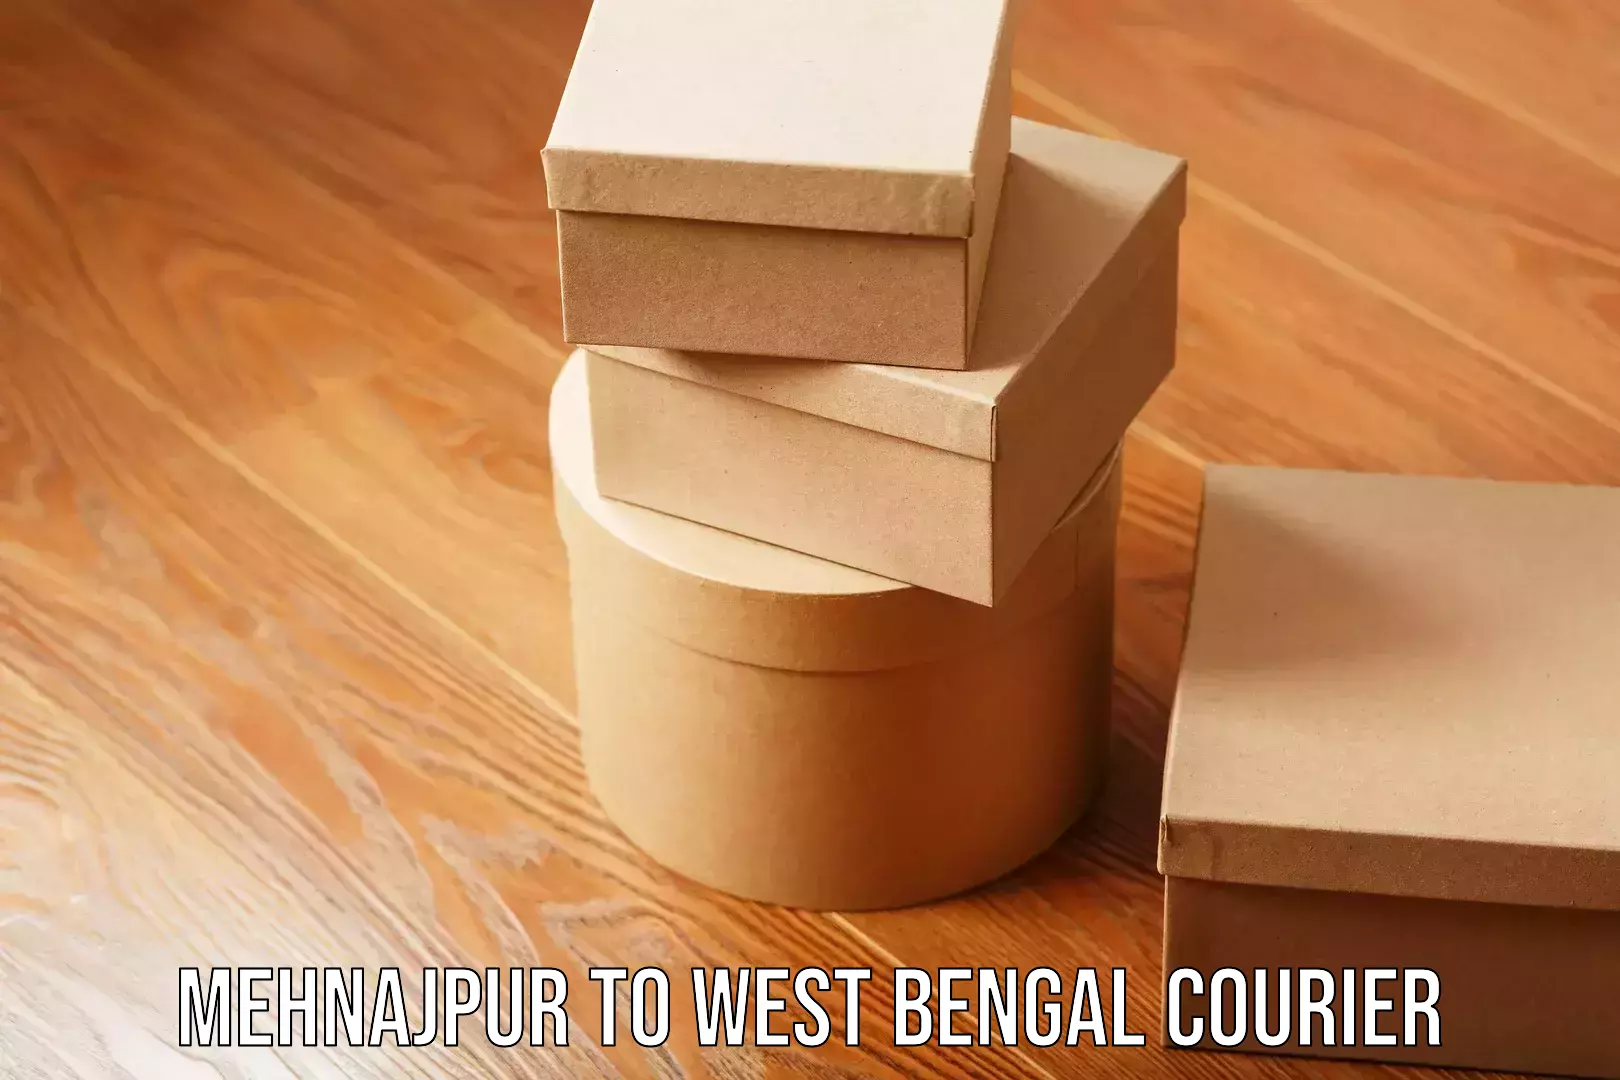 Stress-free moving Mehnajpur to West Bengal